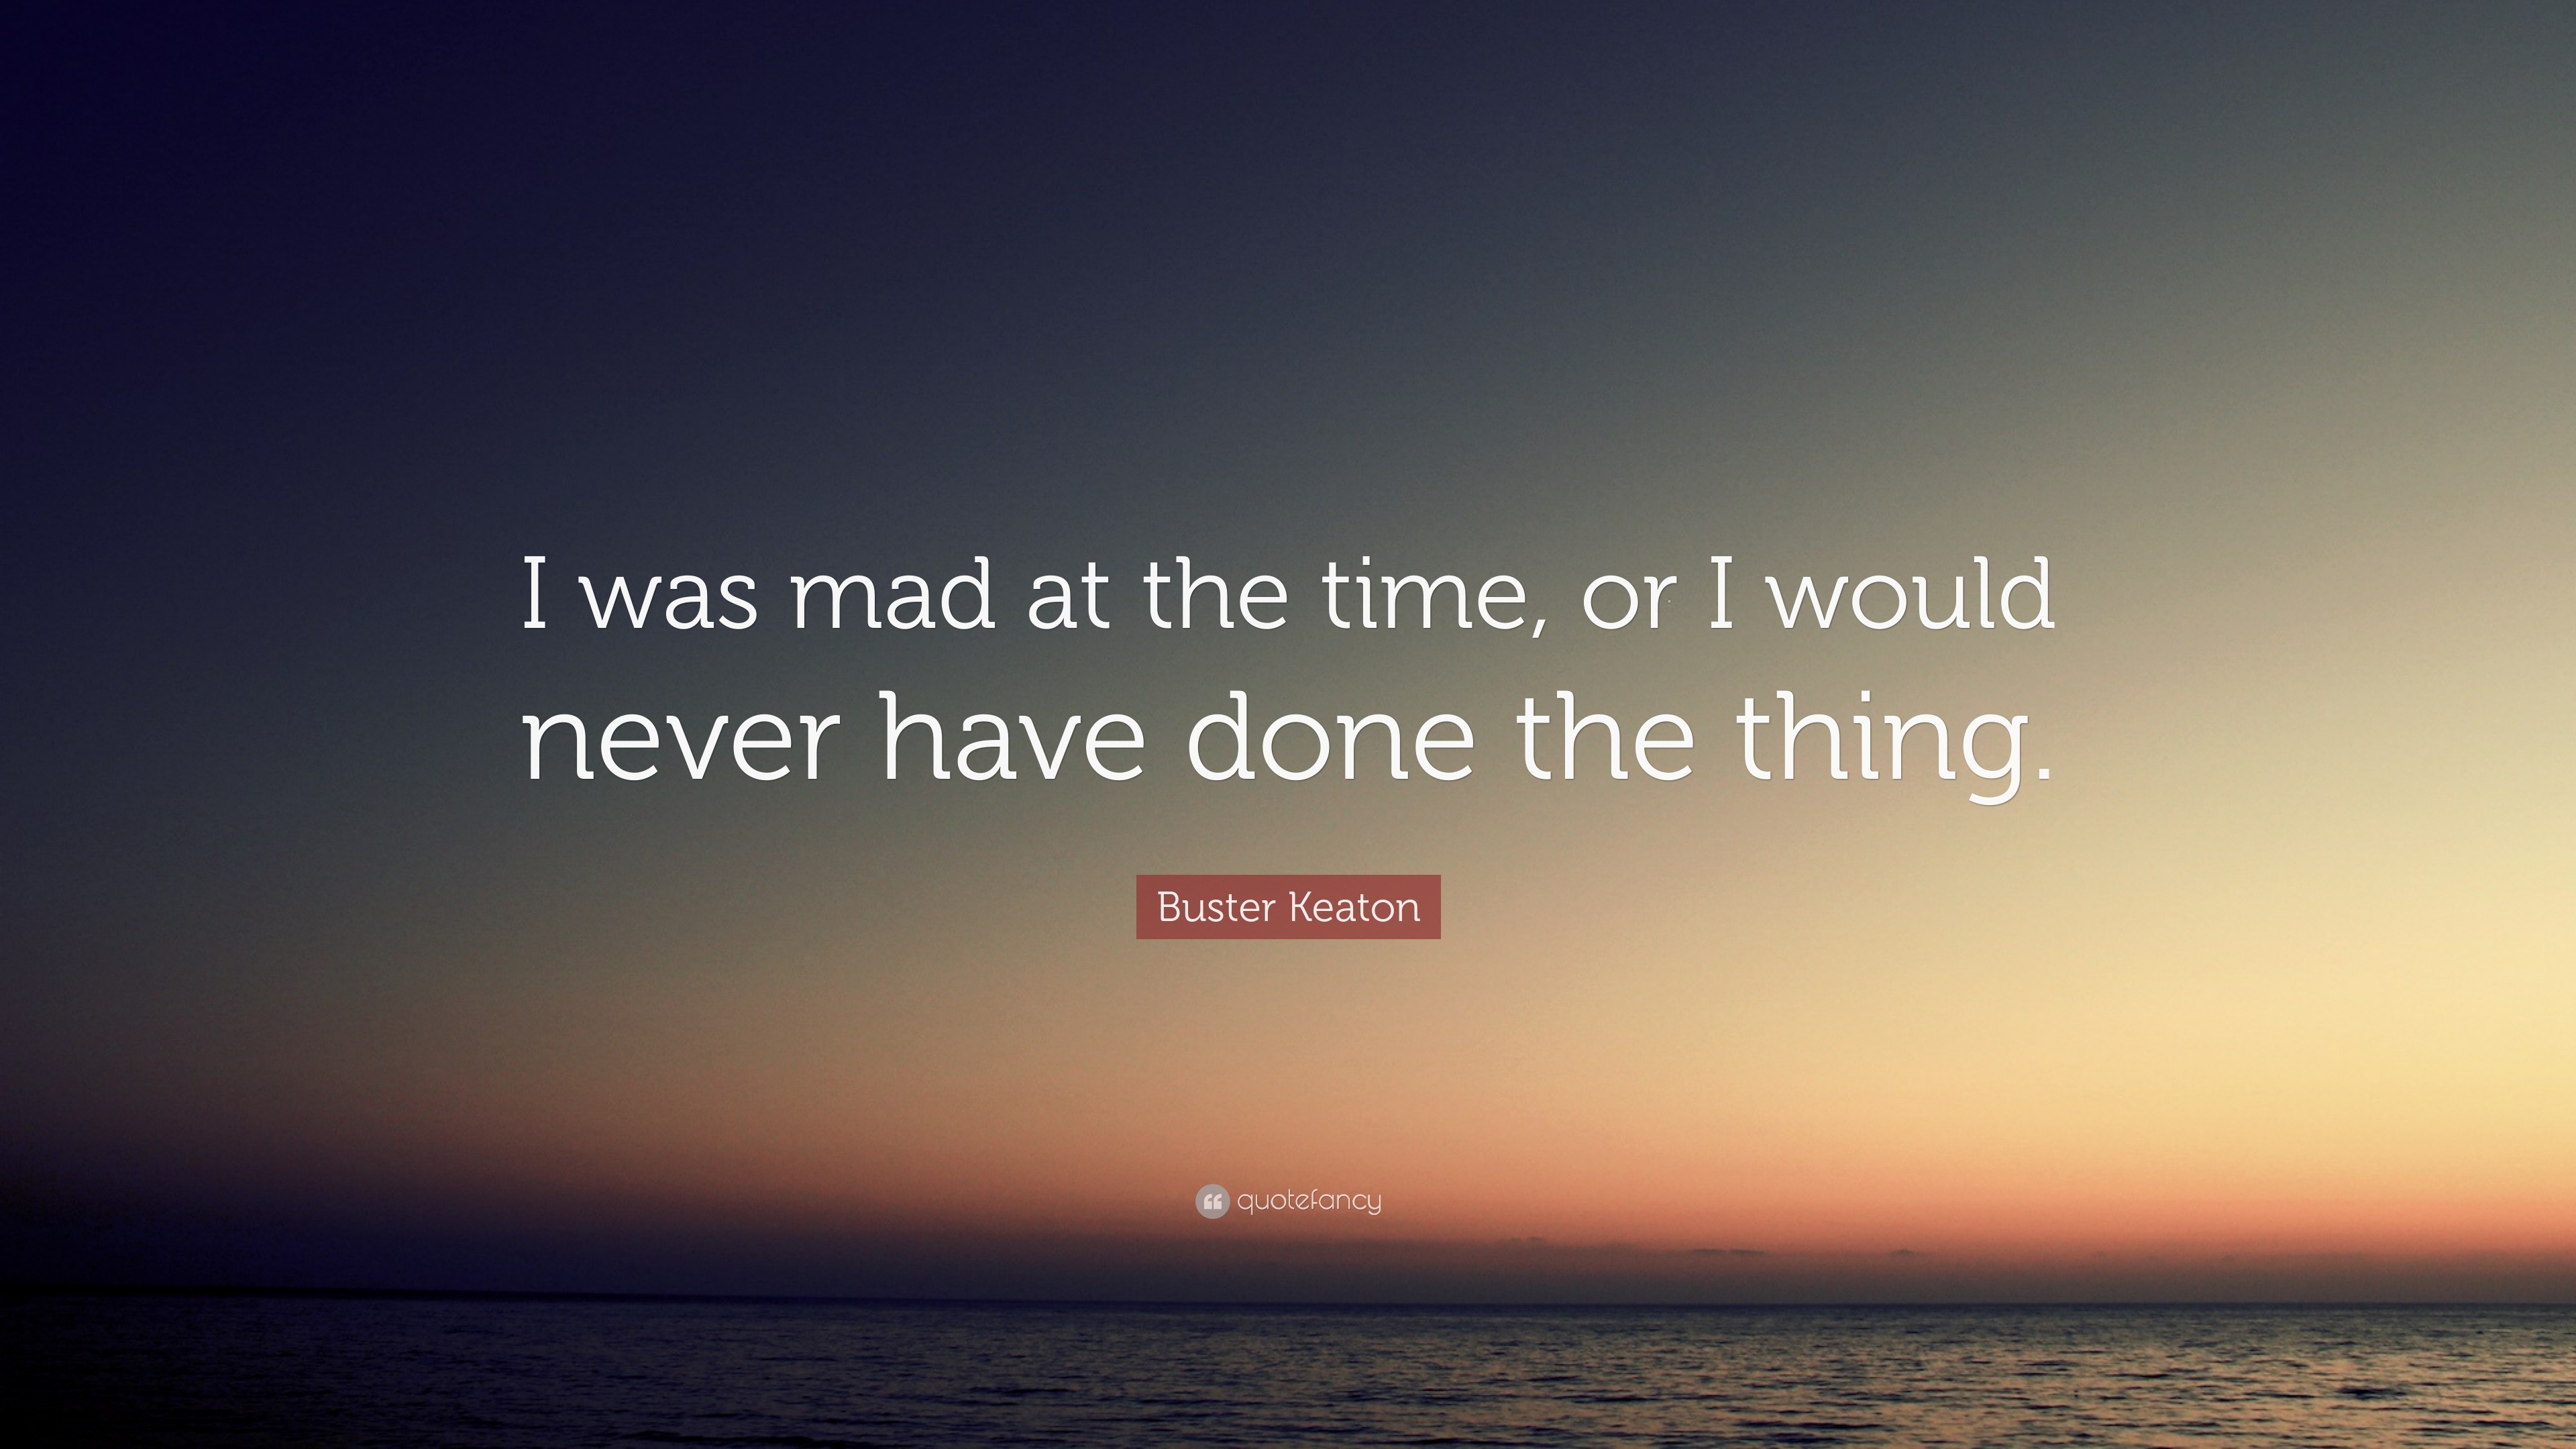 Buster Keaton Quote: “I was mad at the time, or I would never have done ...